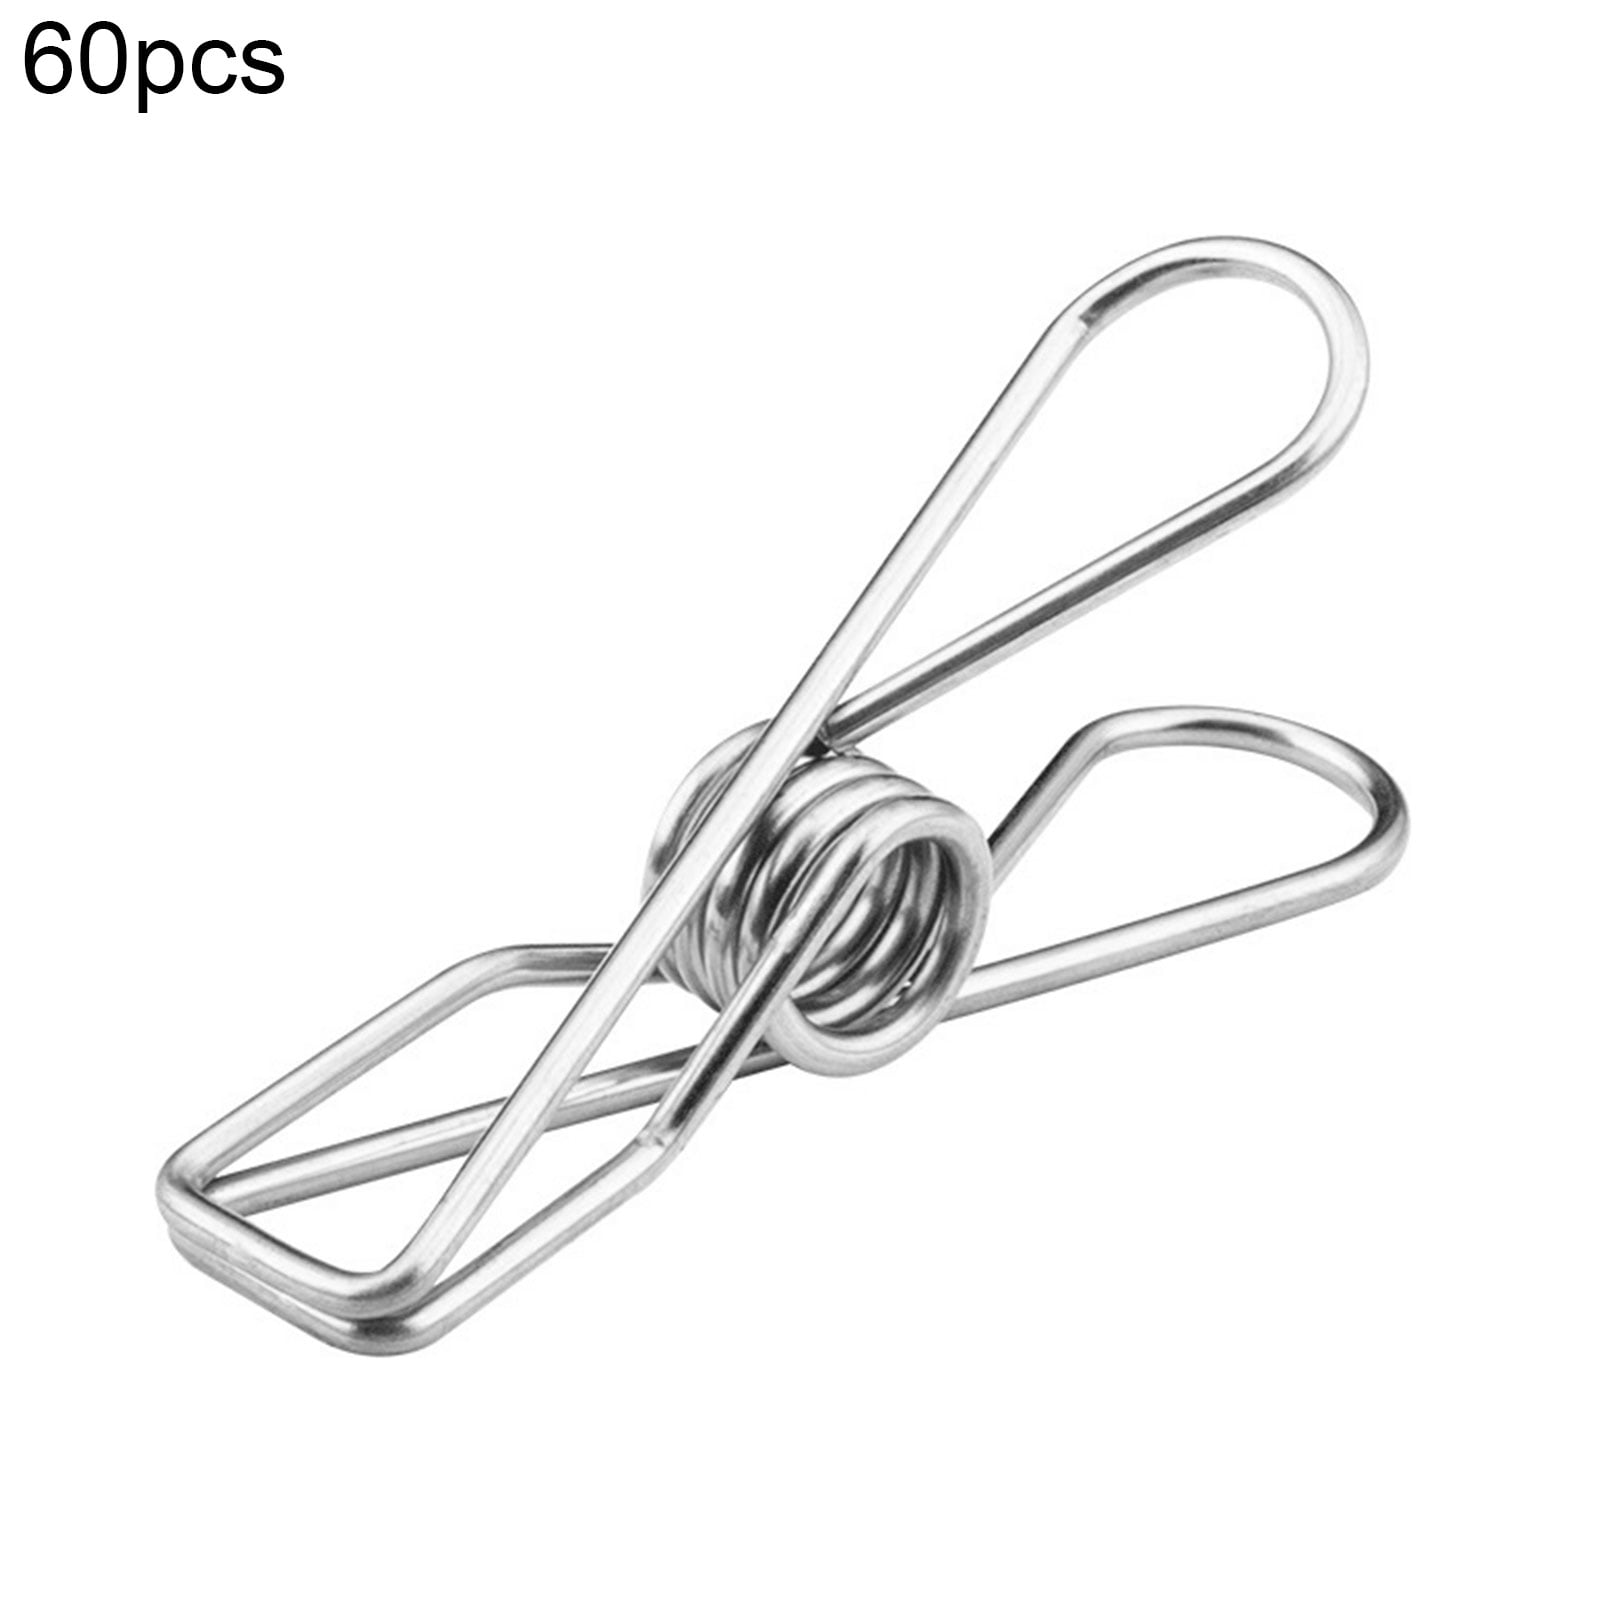 Hot 30/60PCS Stainless Steel Clothes Pegs Hanging Pins Clips Laundry Clamps 